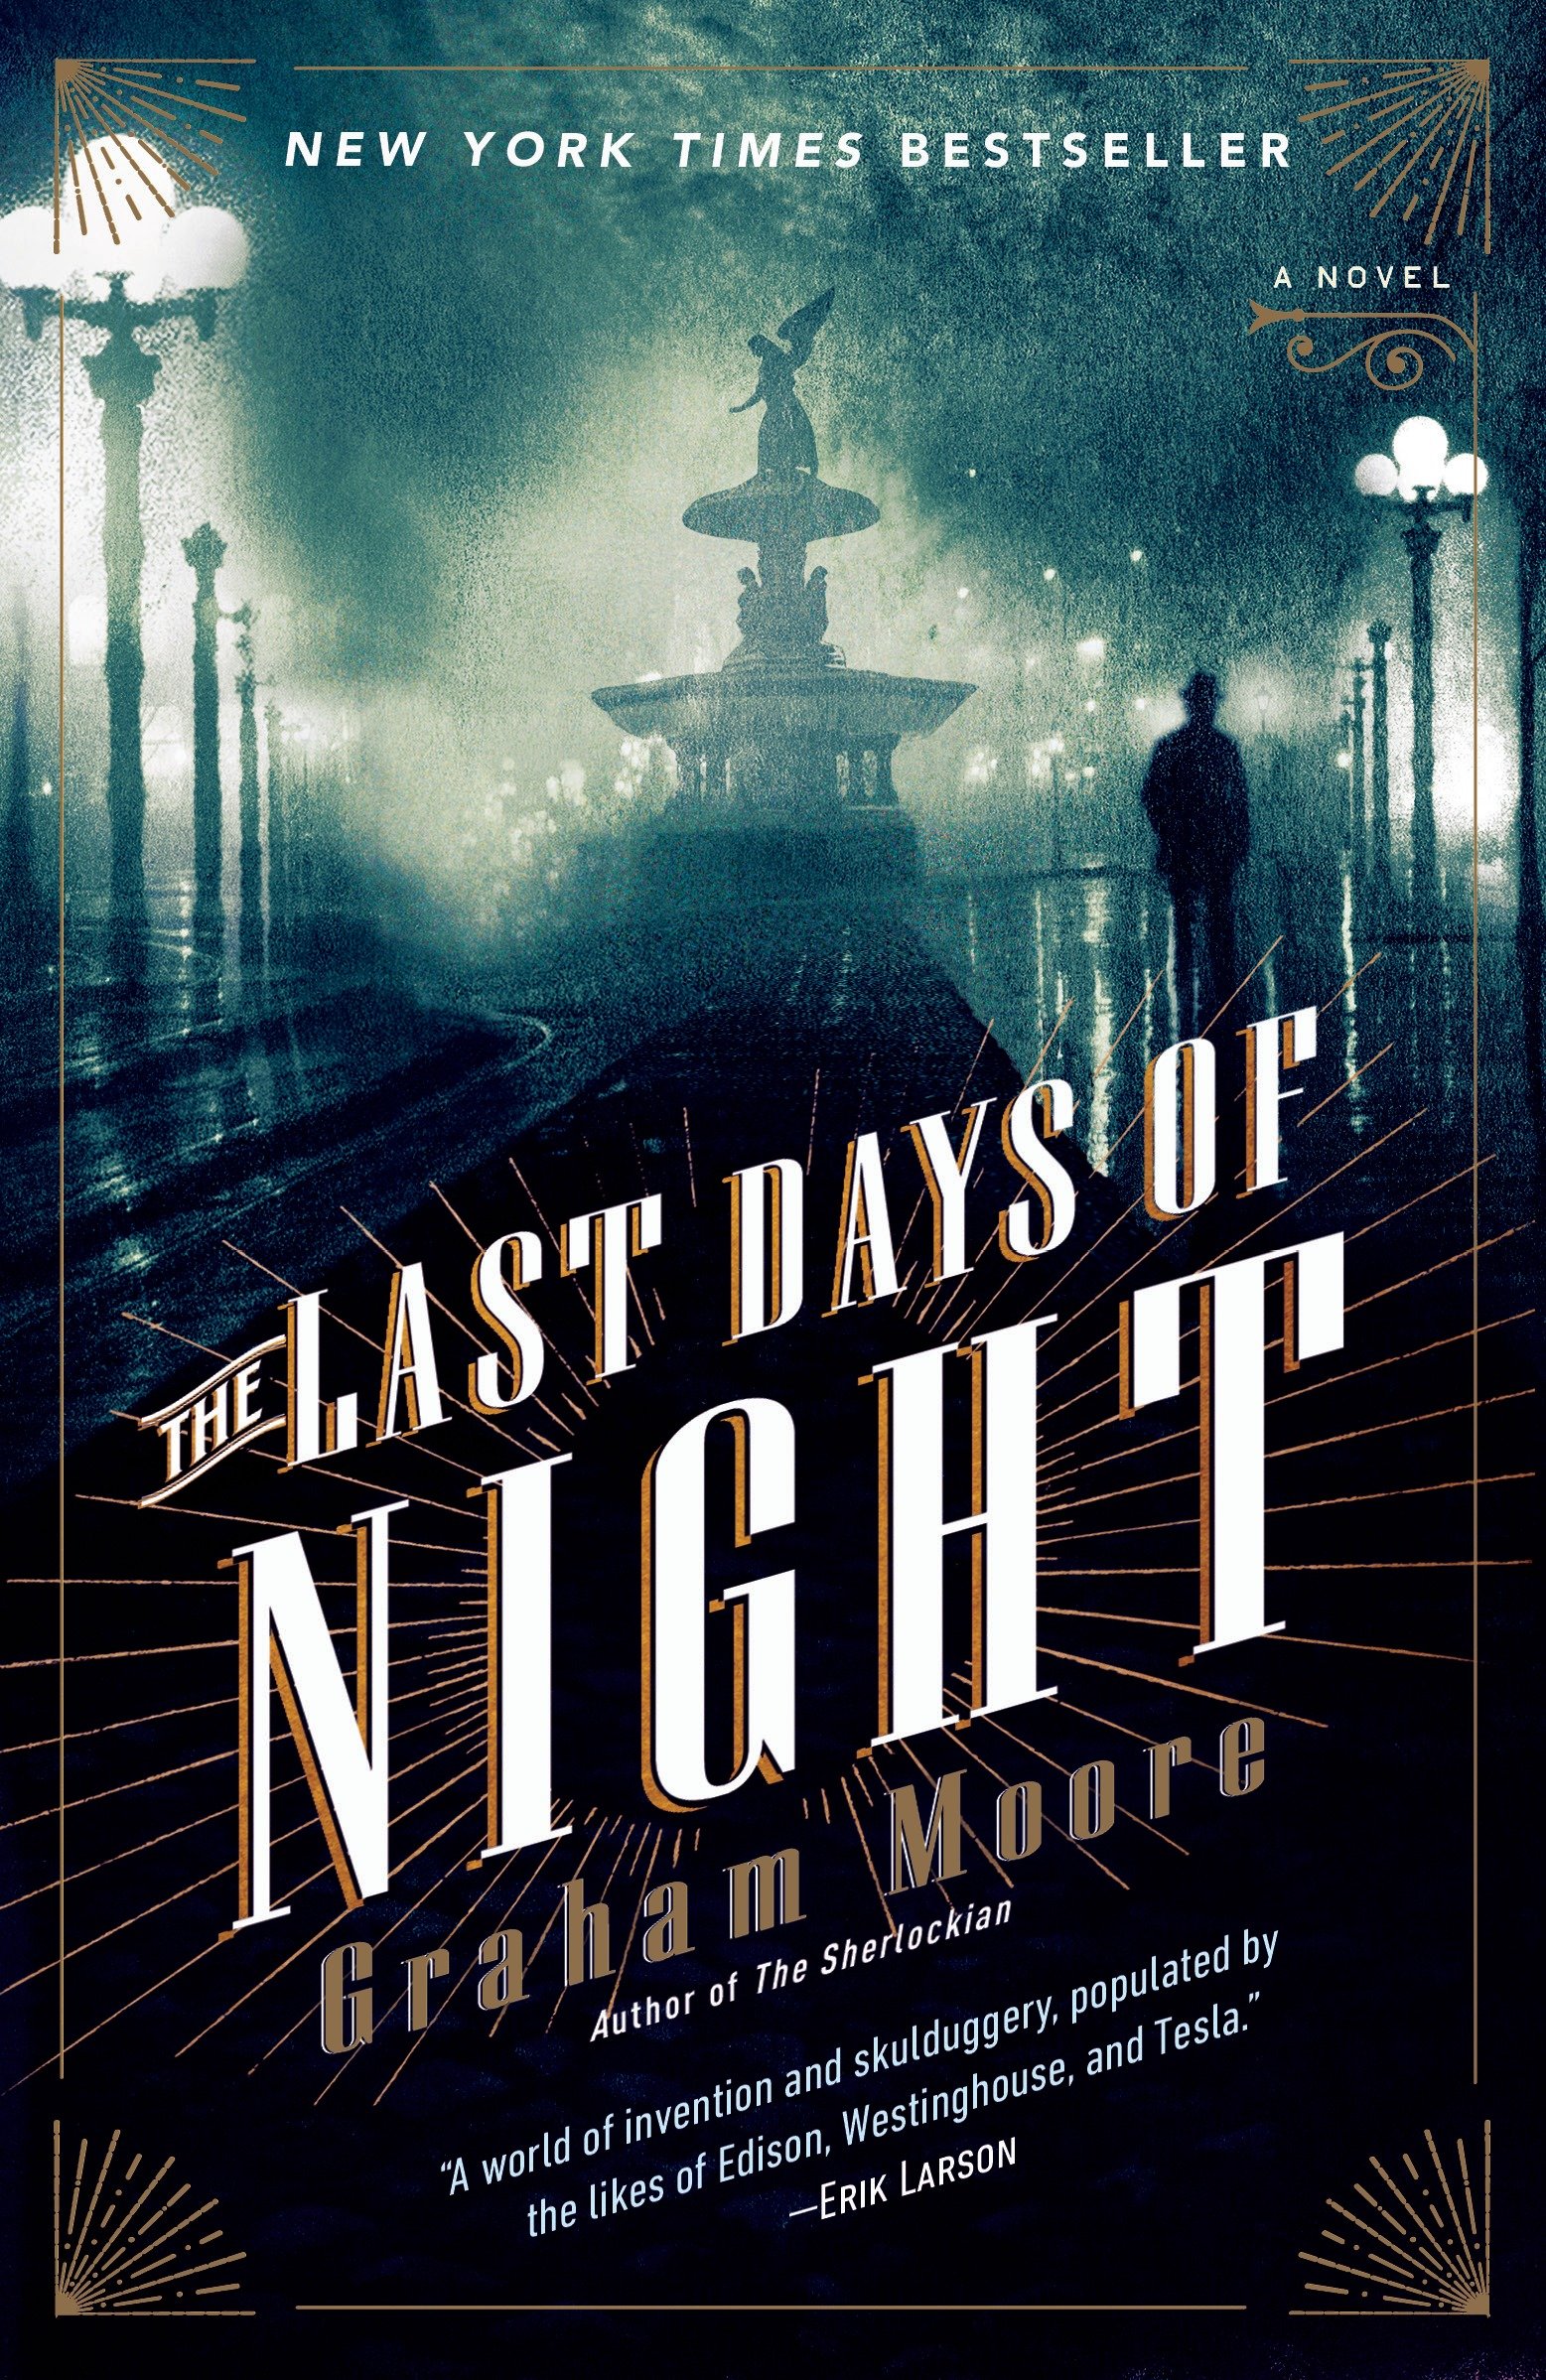 The last days of night cover image